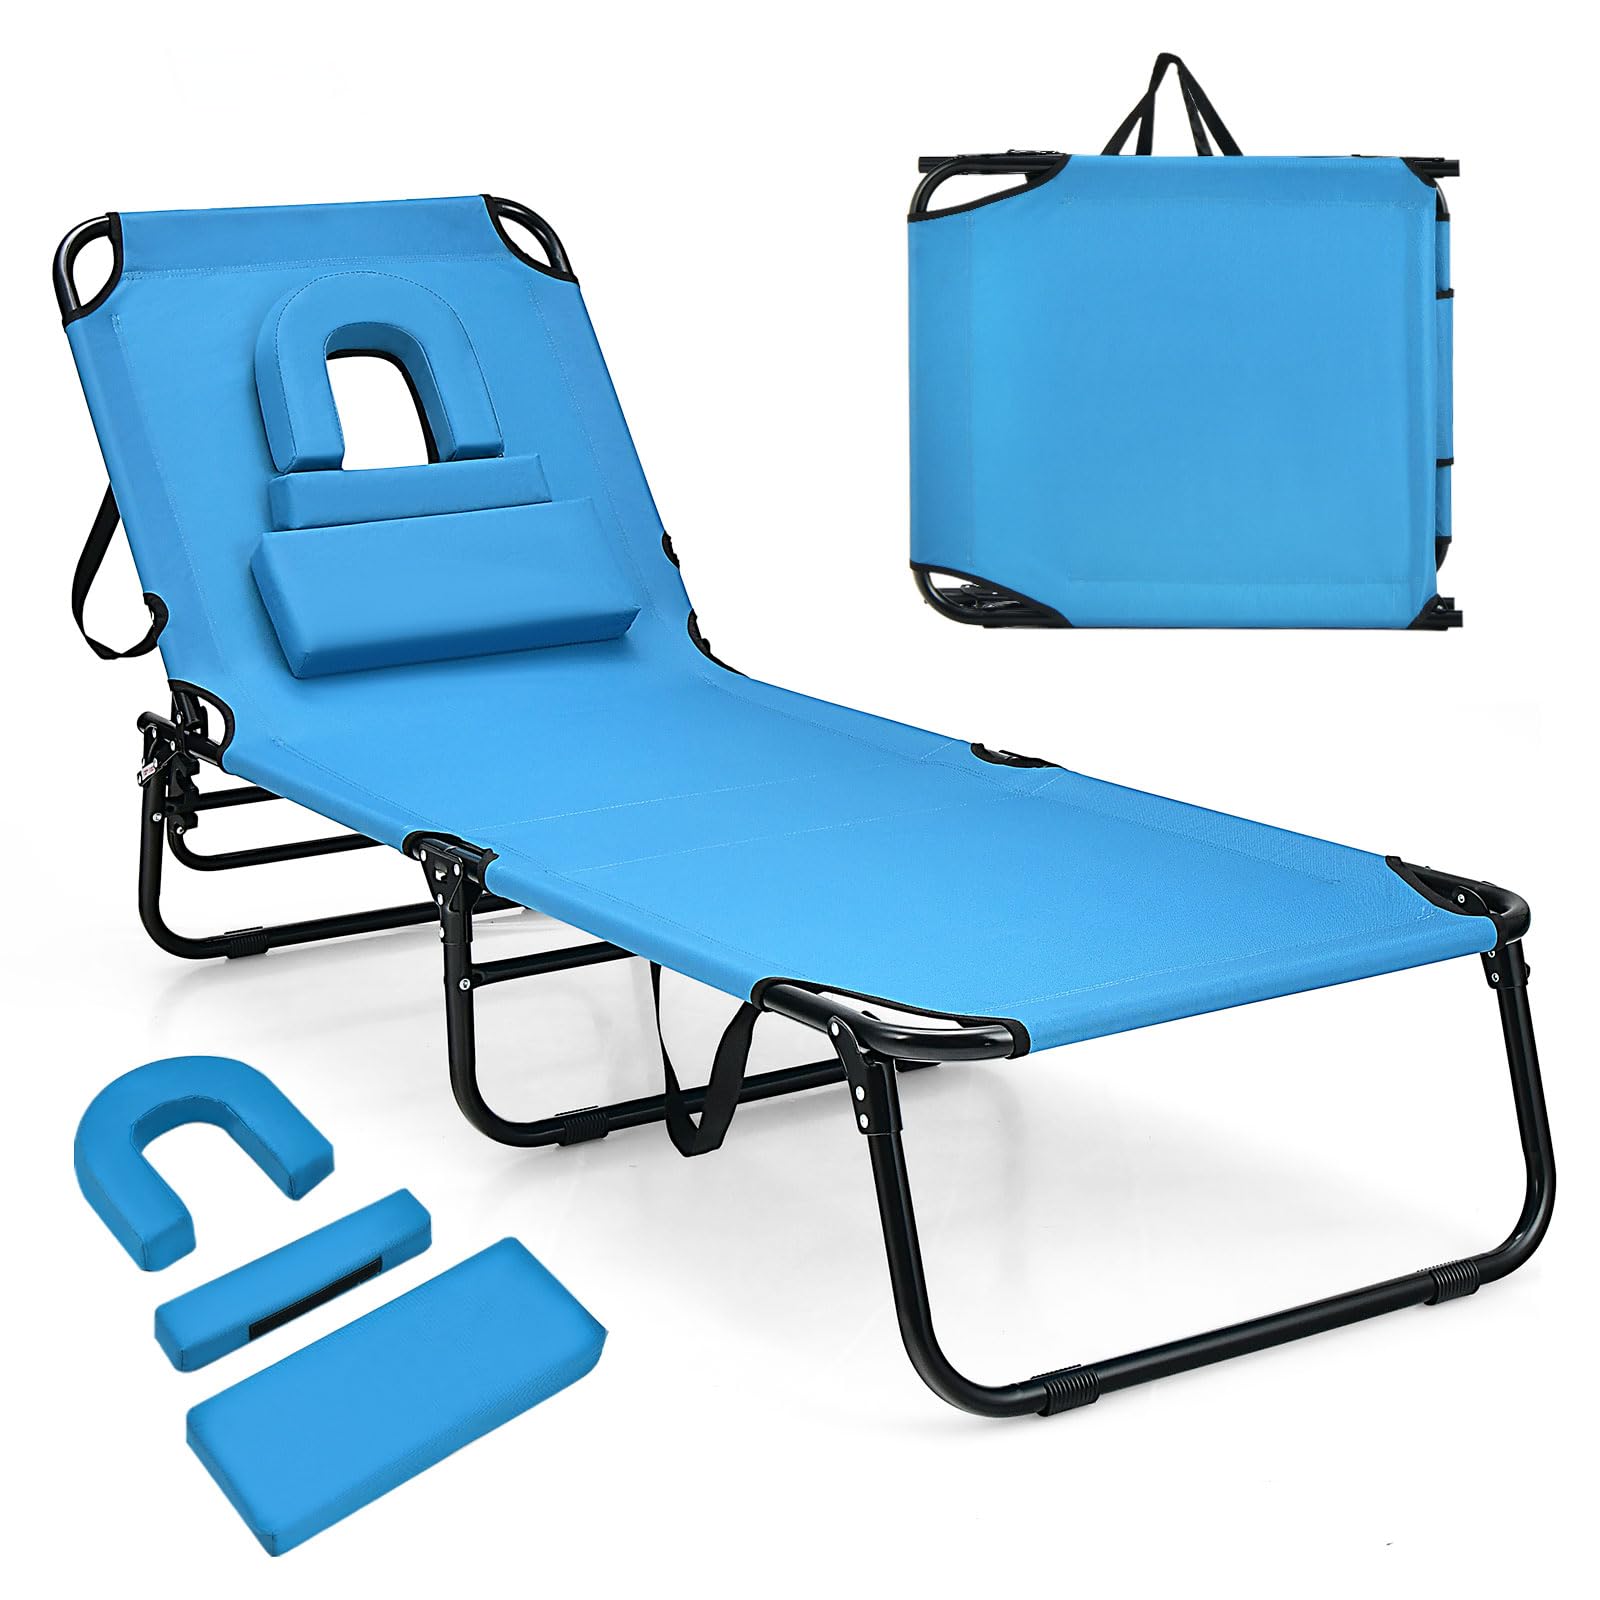 Giantex Folding Beach Tanning Chair - Adjustable Patio Lounge Chair w/Face Hole, Removable Pillows, Carry Strap